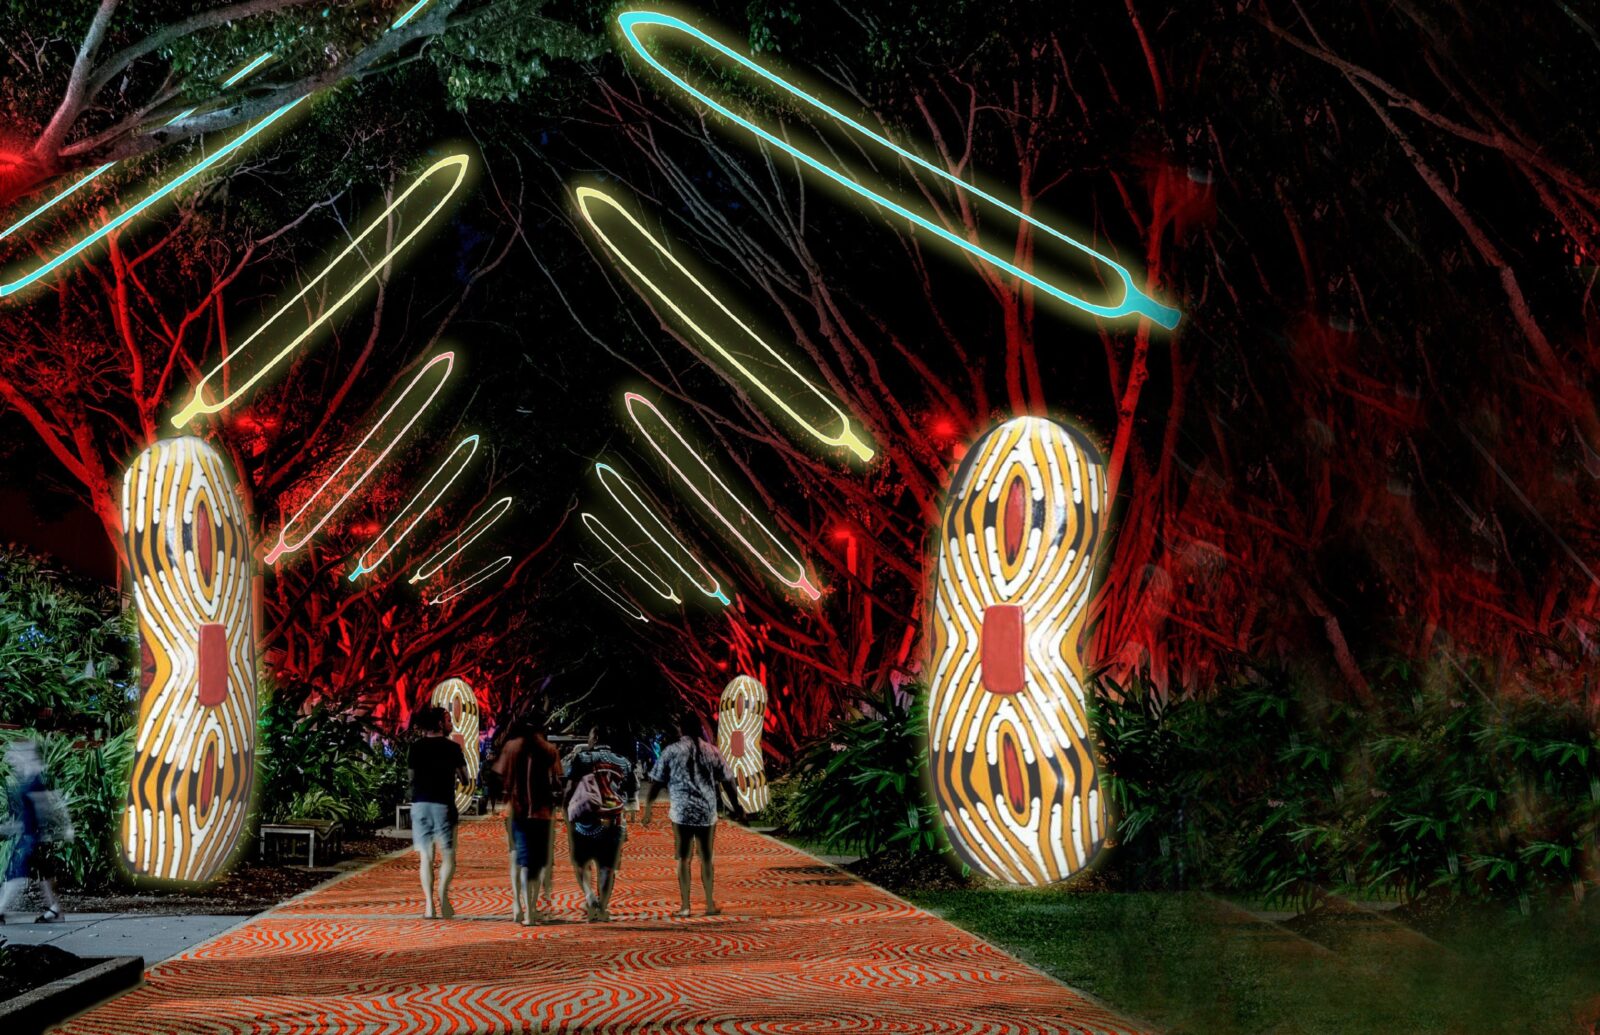 The Cairns Esplanade will become our living storybook transformed through spectacular art and light